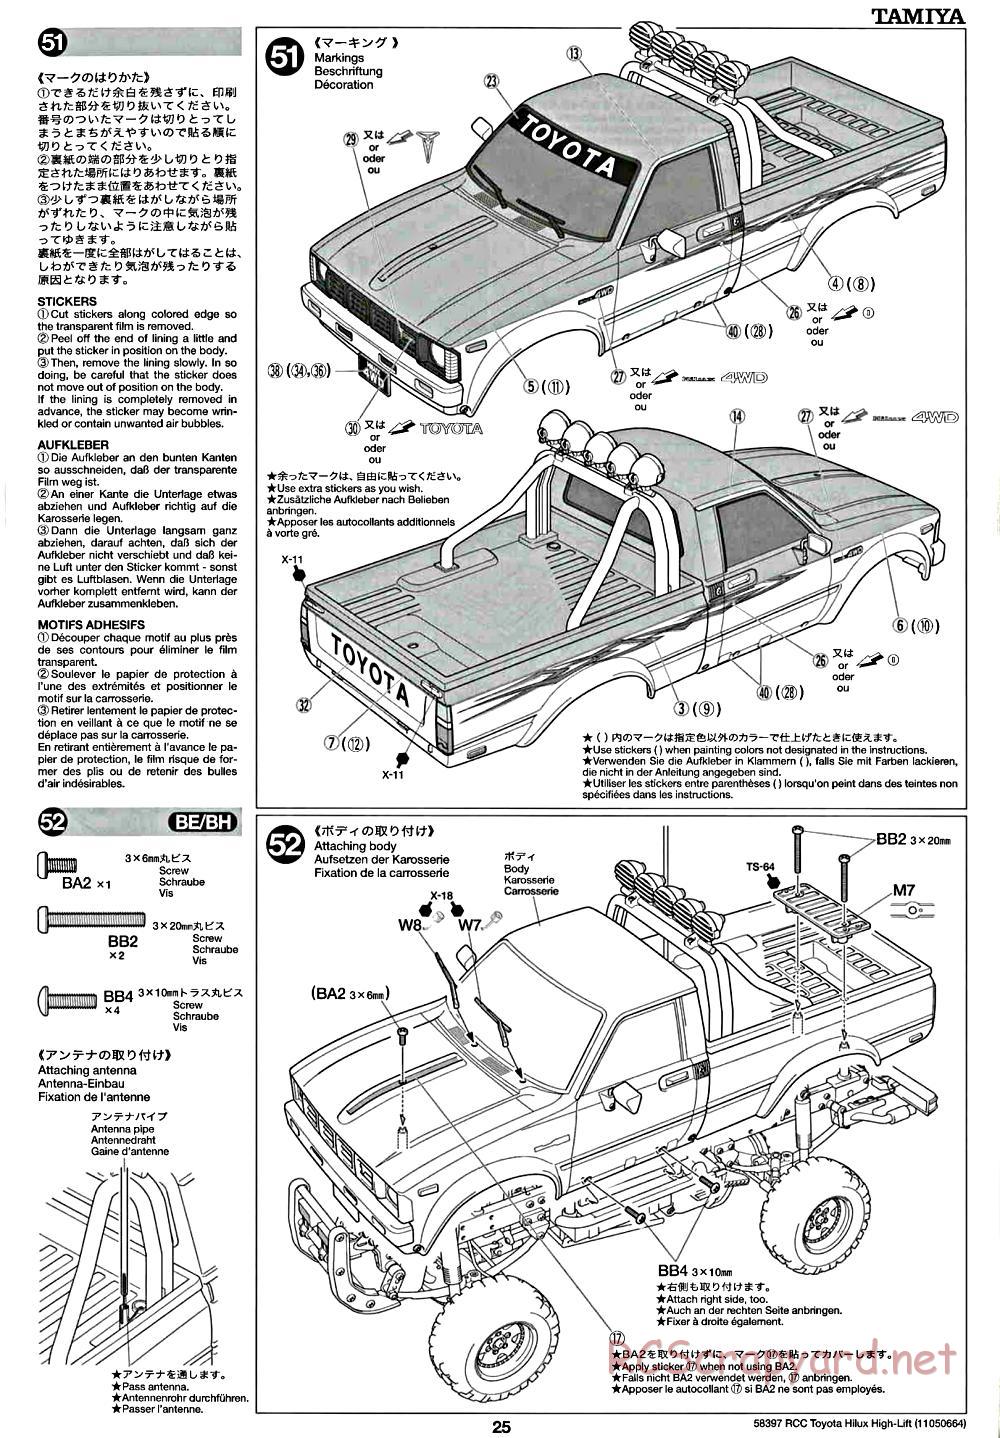 Tamiya - Toyota Hilux High-Lift Chassis - Manual - Page 25